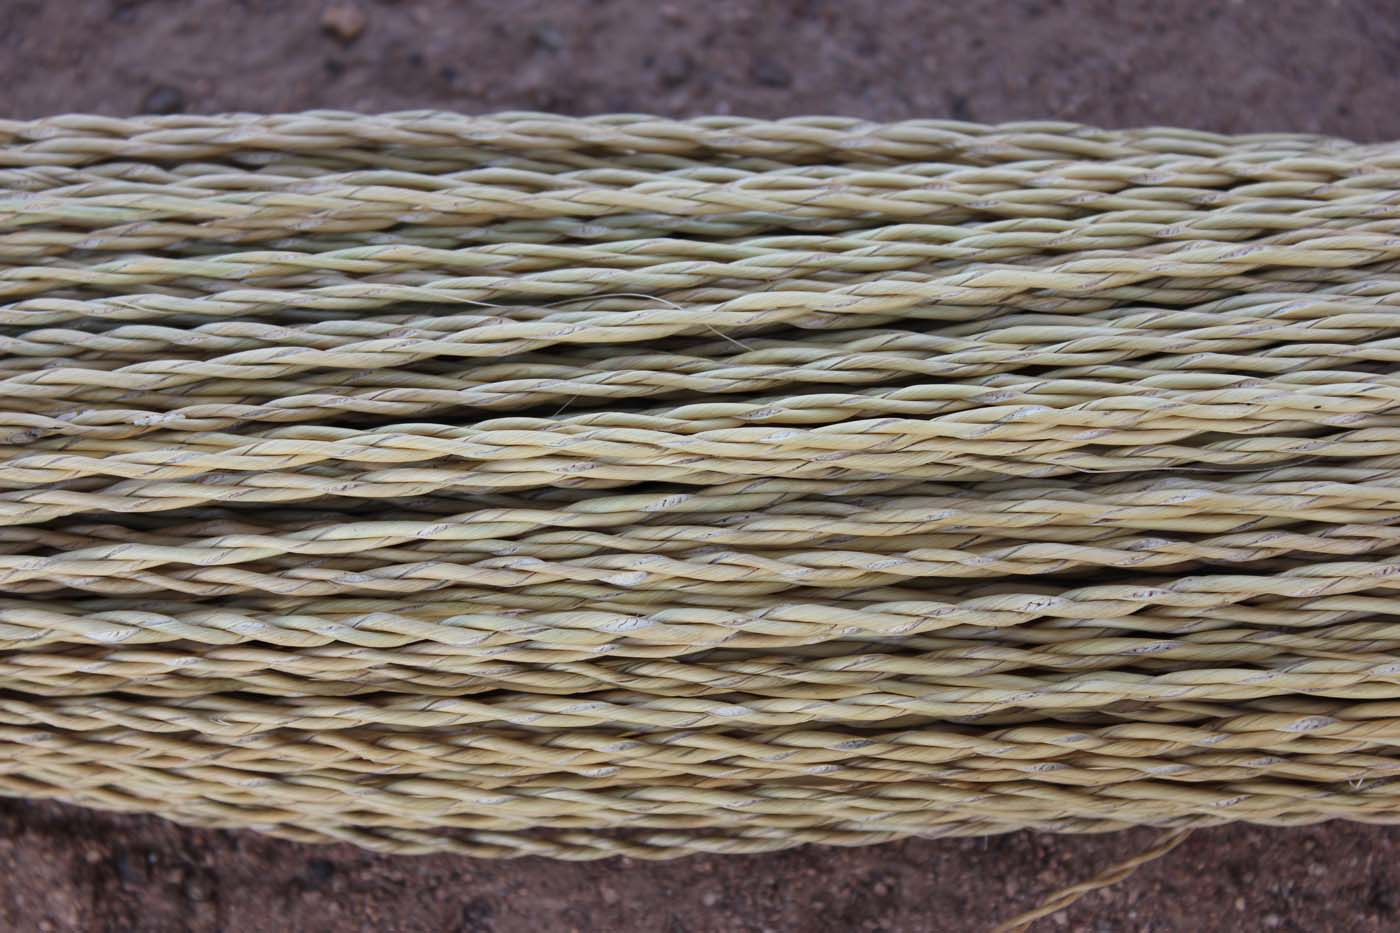 Straw that is prepped and ready to dye